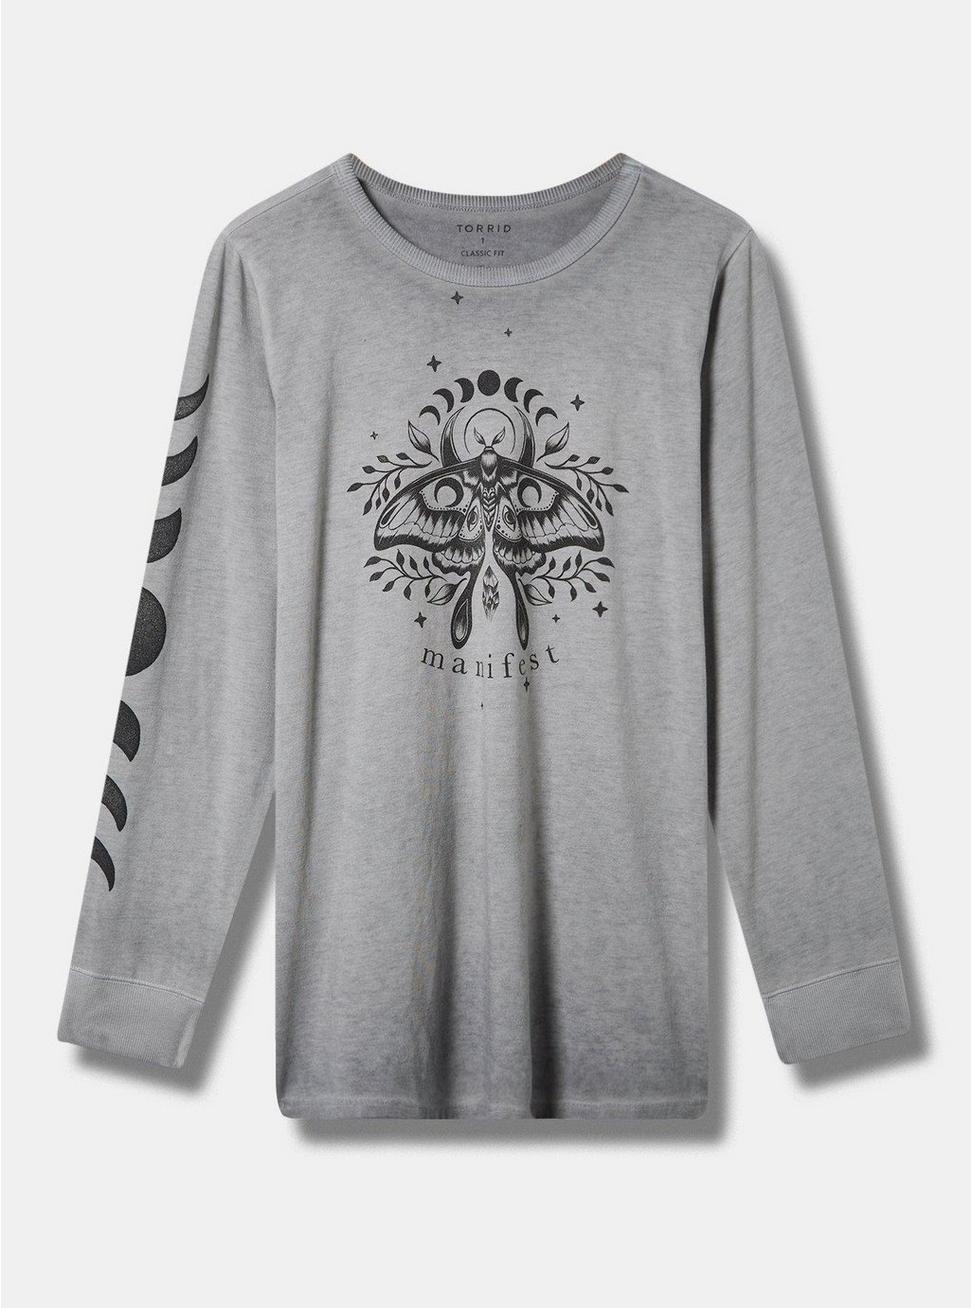 Plus Size Mystic Moth Classic Fit Signature Jersey Long Sleeve Tee, FORMAL GRAY, hi-res